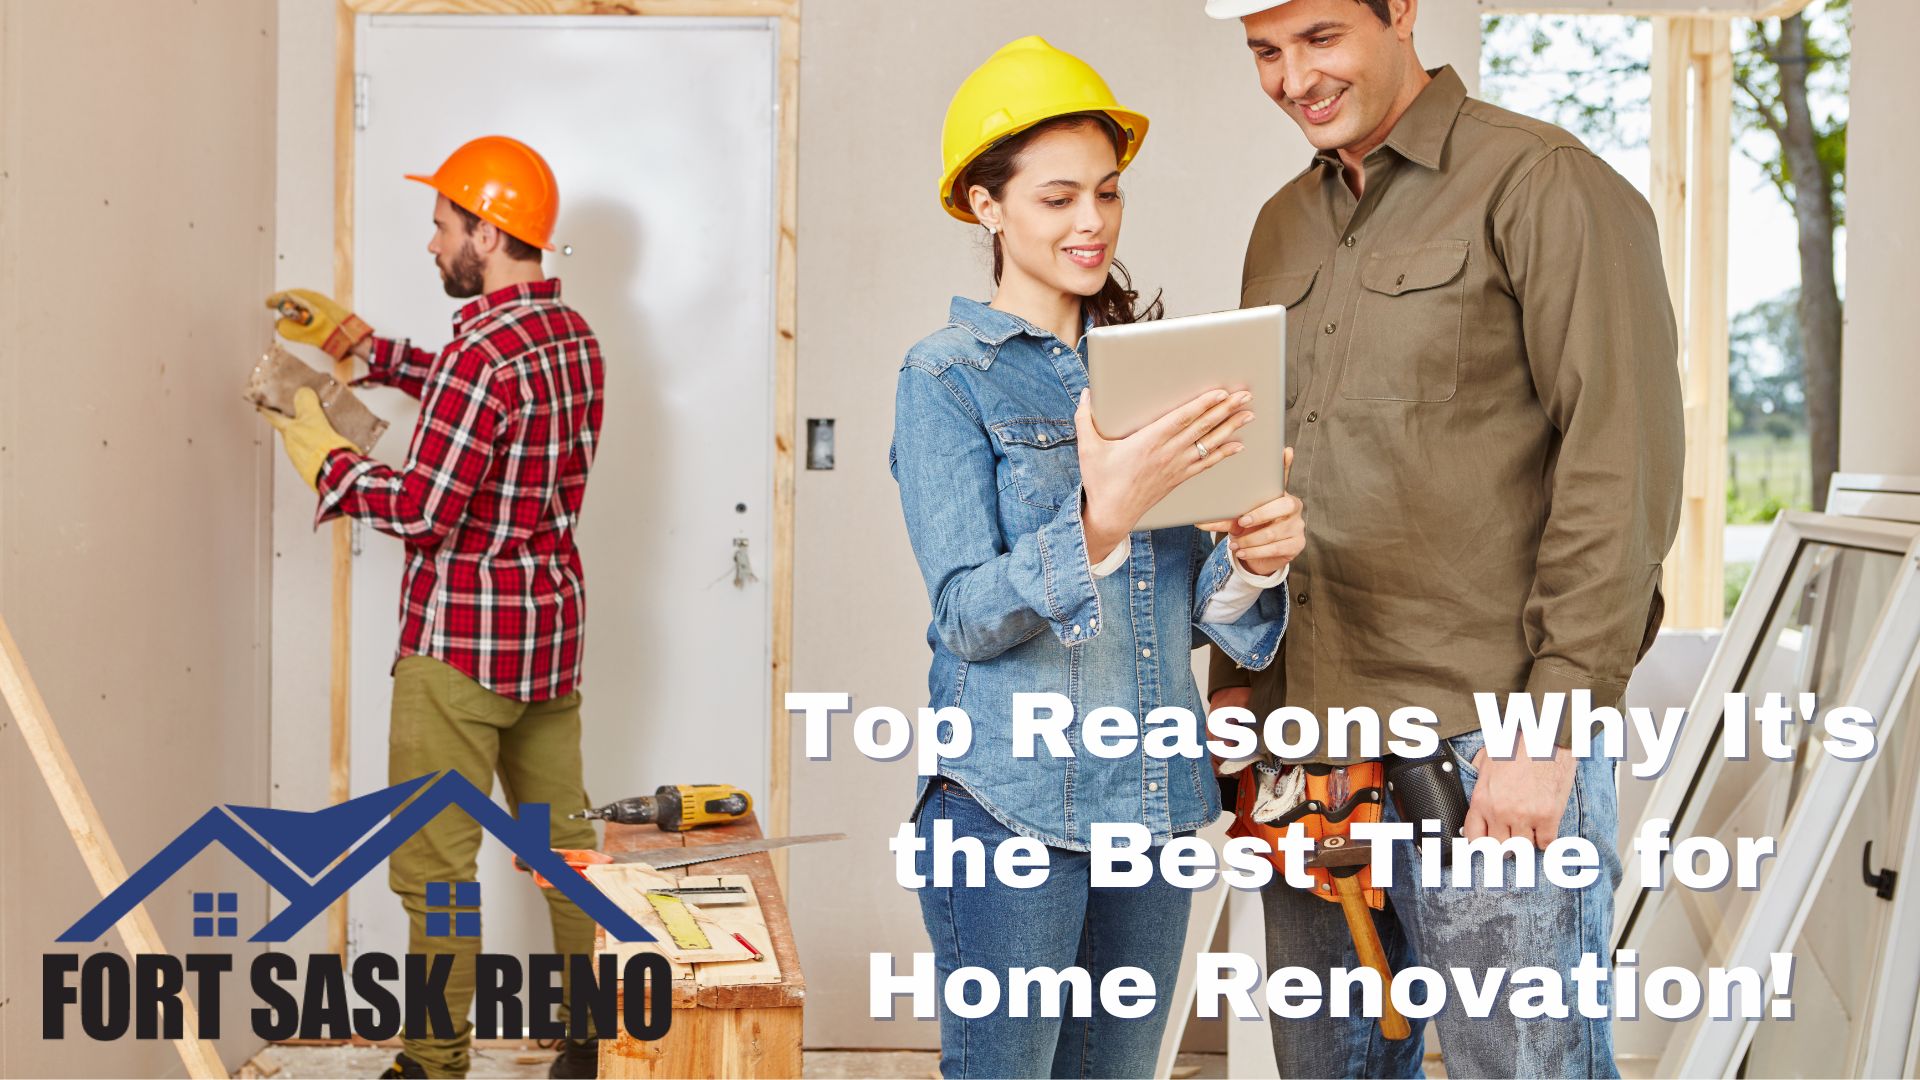 Why It's the Best Time for Home Renovations